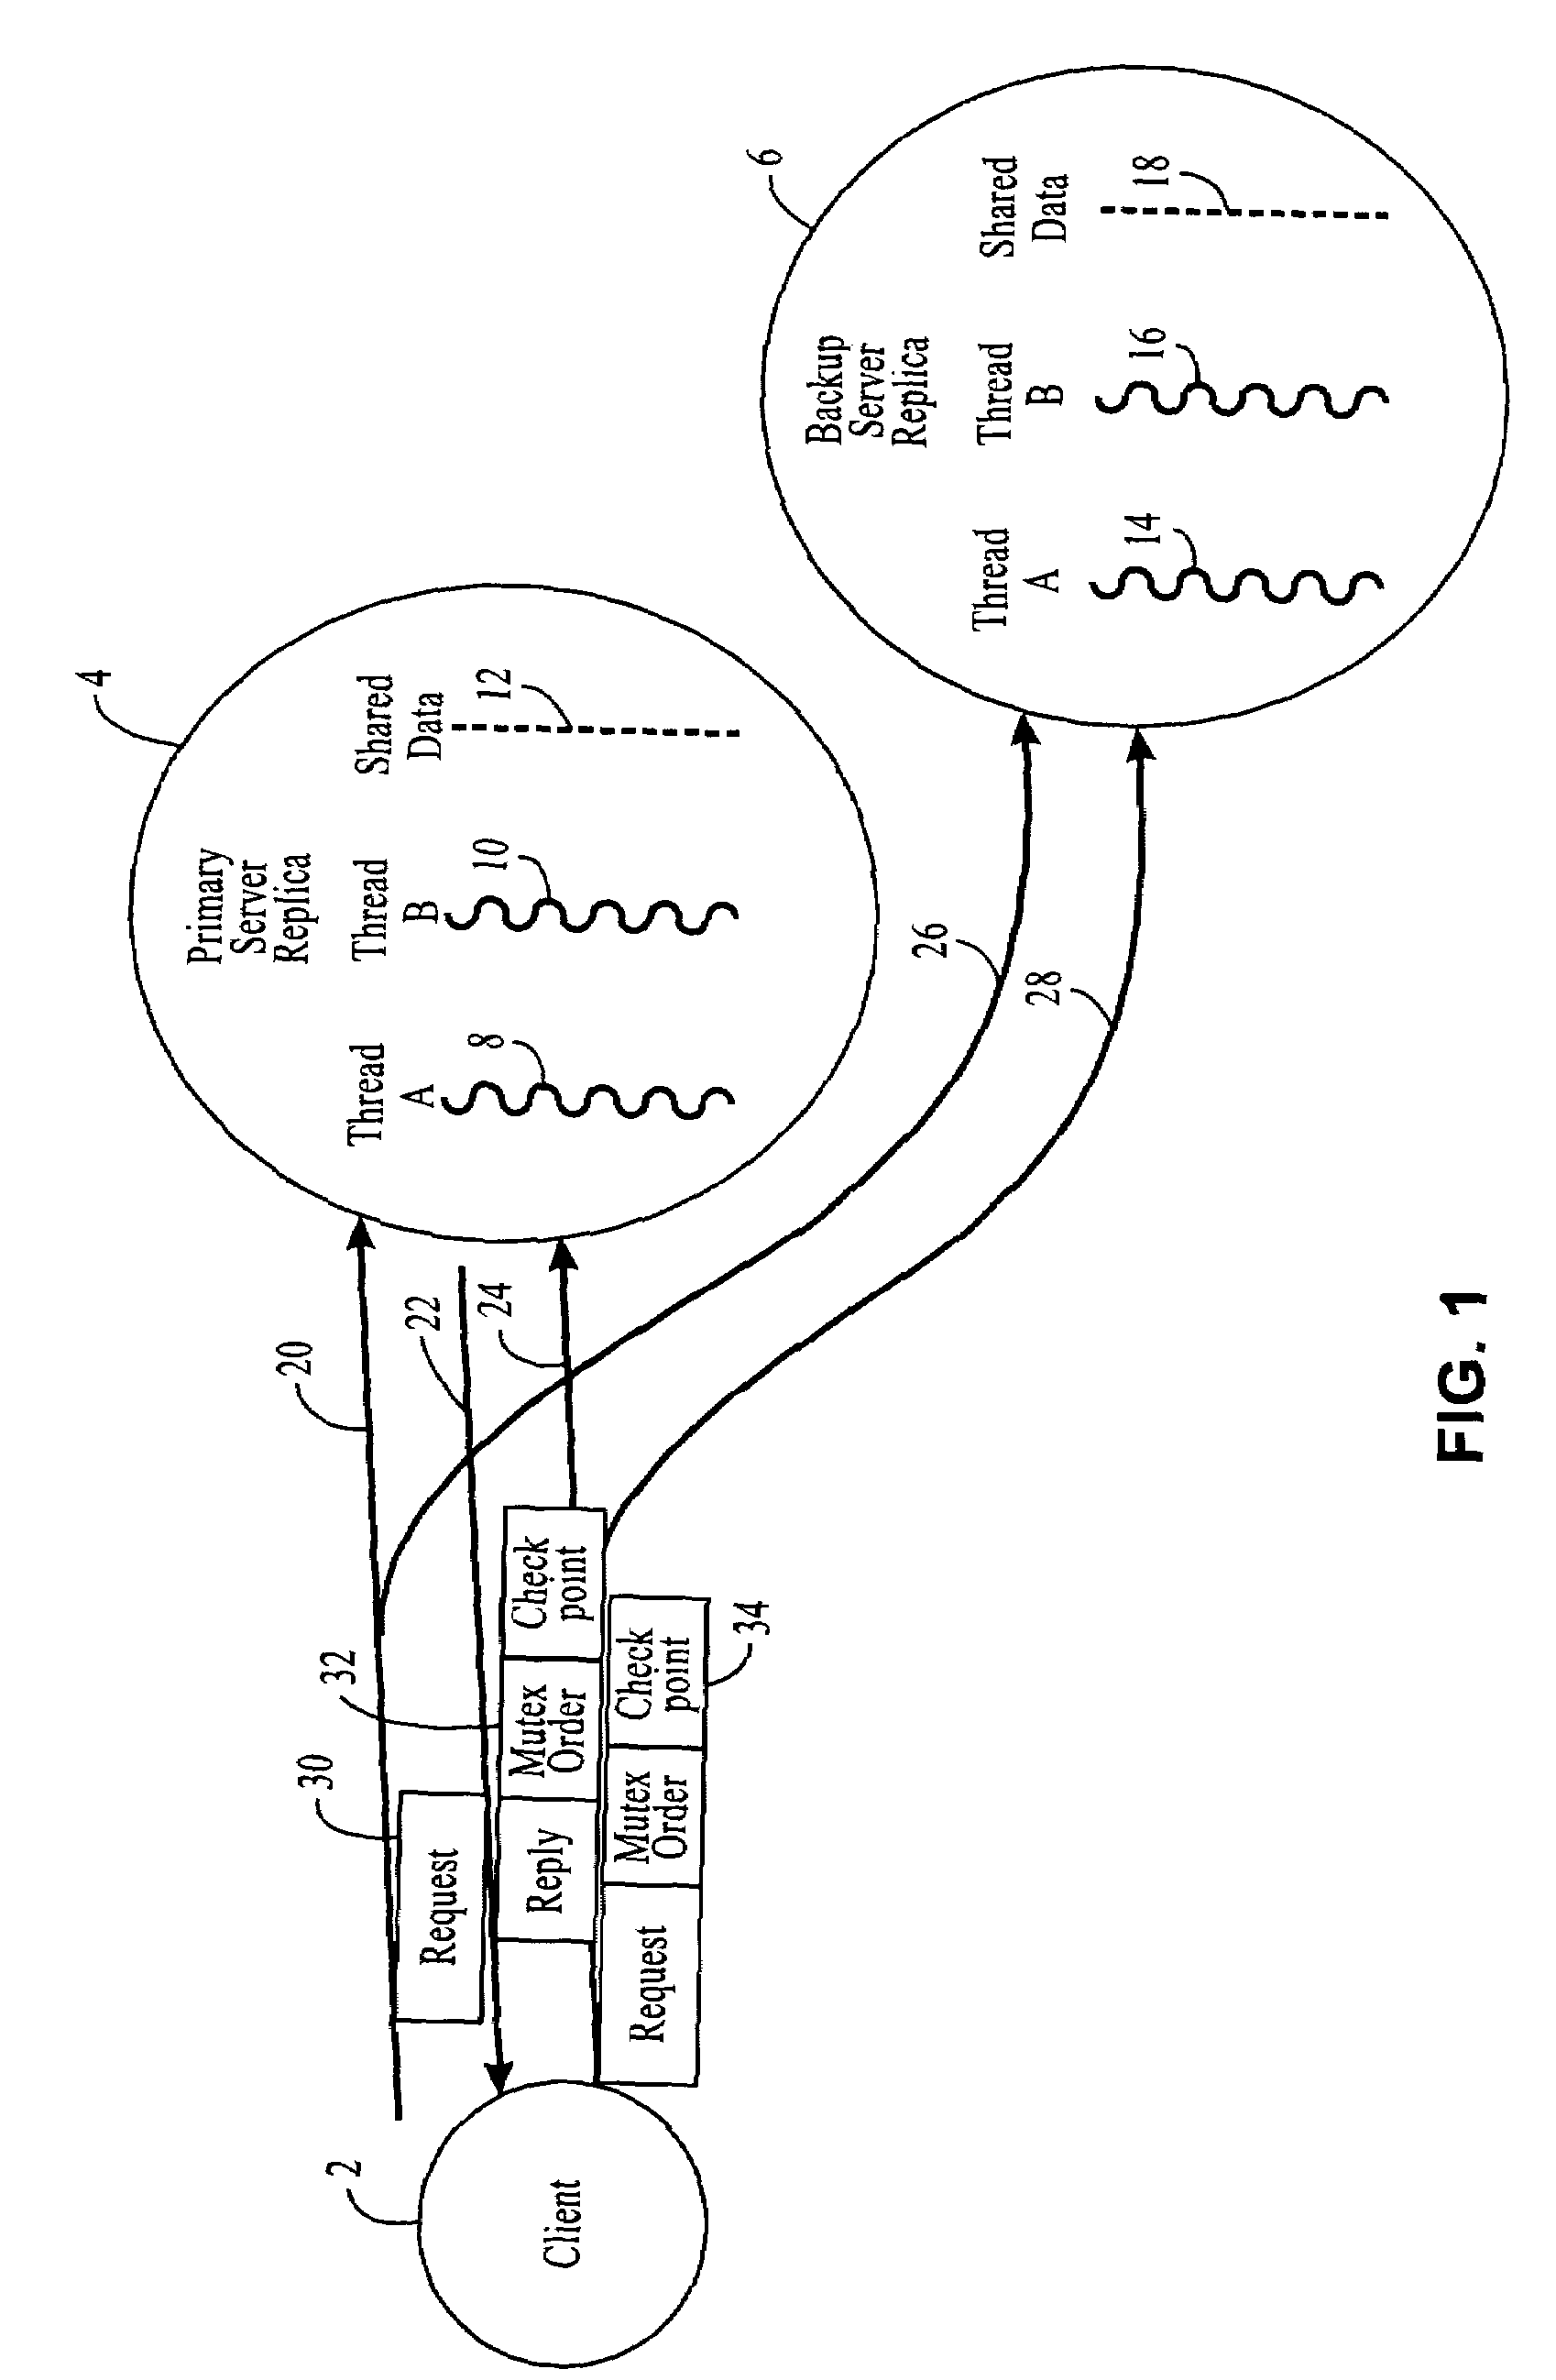 Consistent asynchronous checkpointing of multithreaded application programs based on semi-active or passive replication